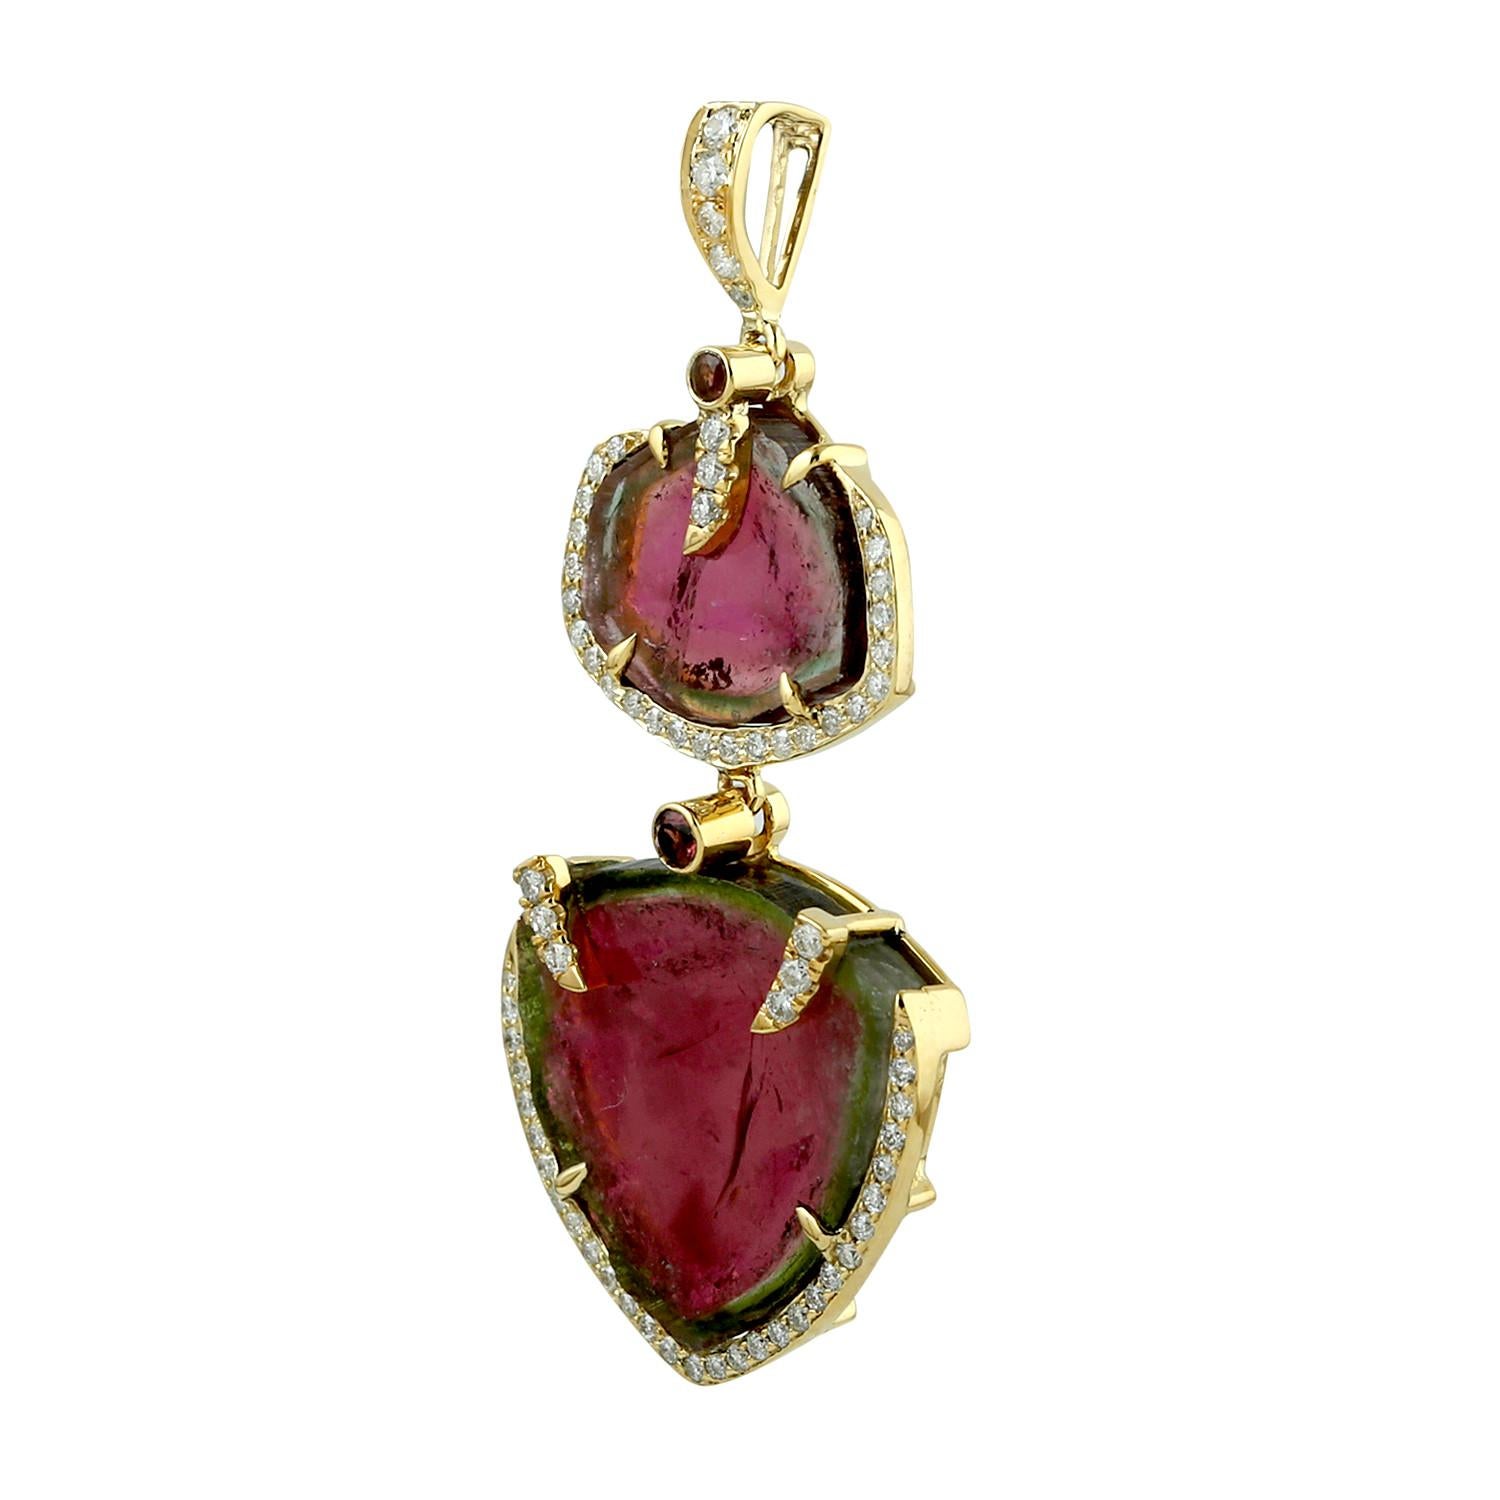 18 Karat Yellow Gold 0.76 Carat Diamond 22.91ct Watermelon Tourmaline Pendant

This pretty and attractive Watermelon Tourmaline pendant and diamonds can be the best gift for mom this Mother's Day. This pendant has an loop.

We guarantee all products